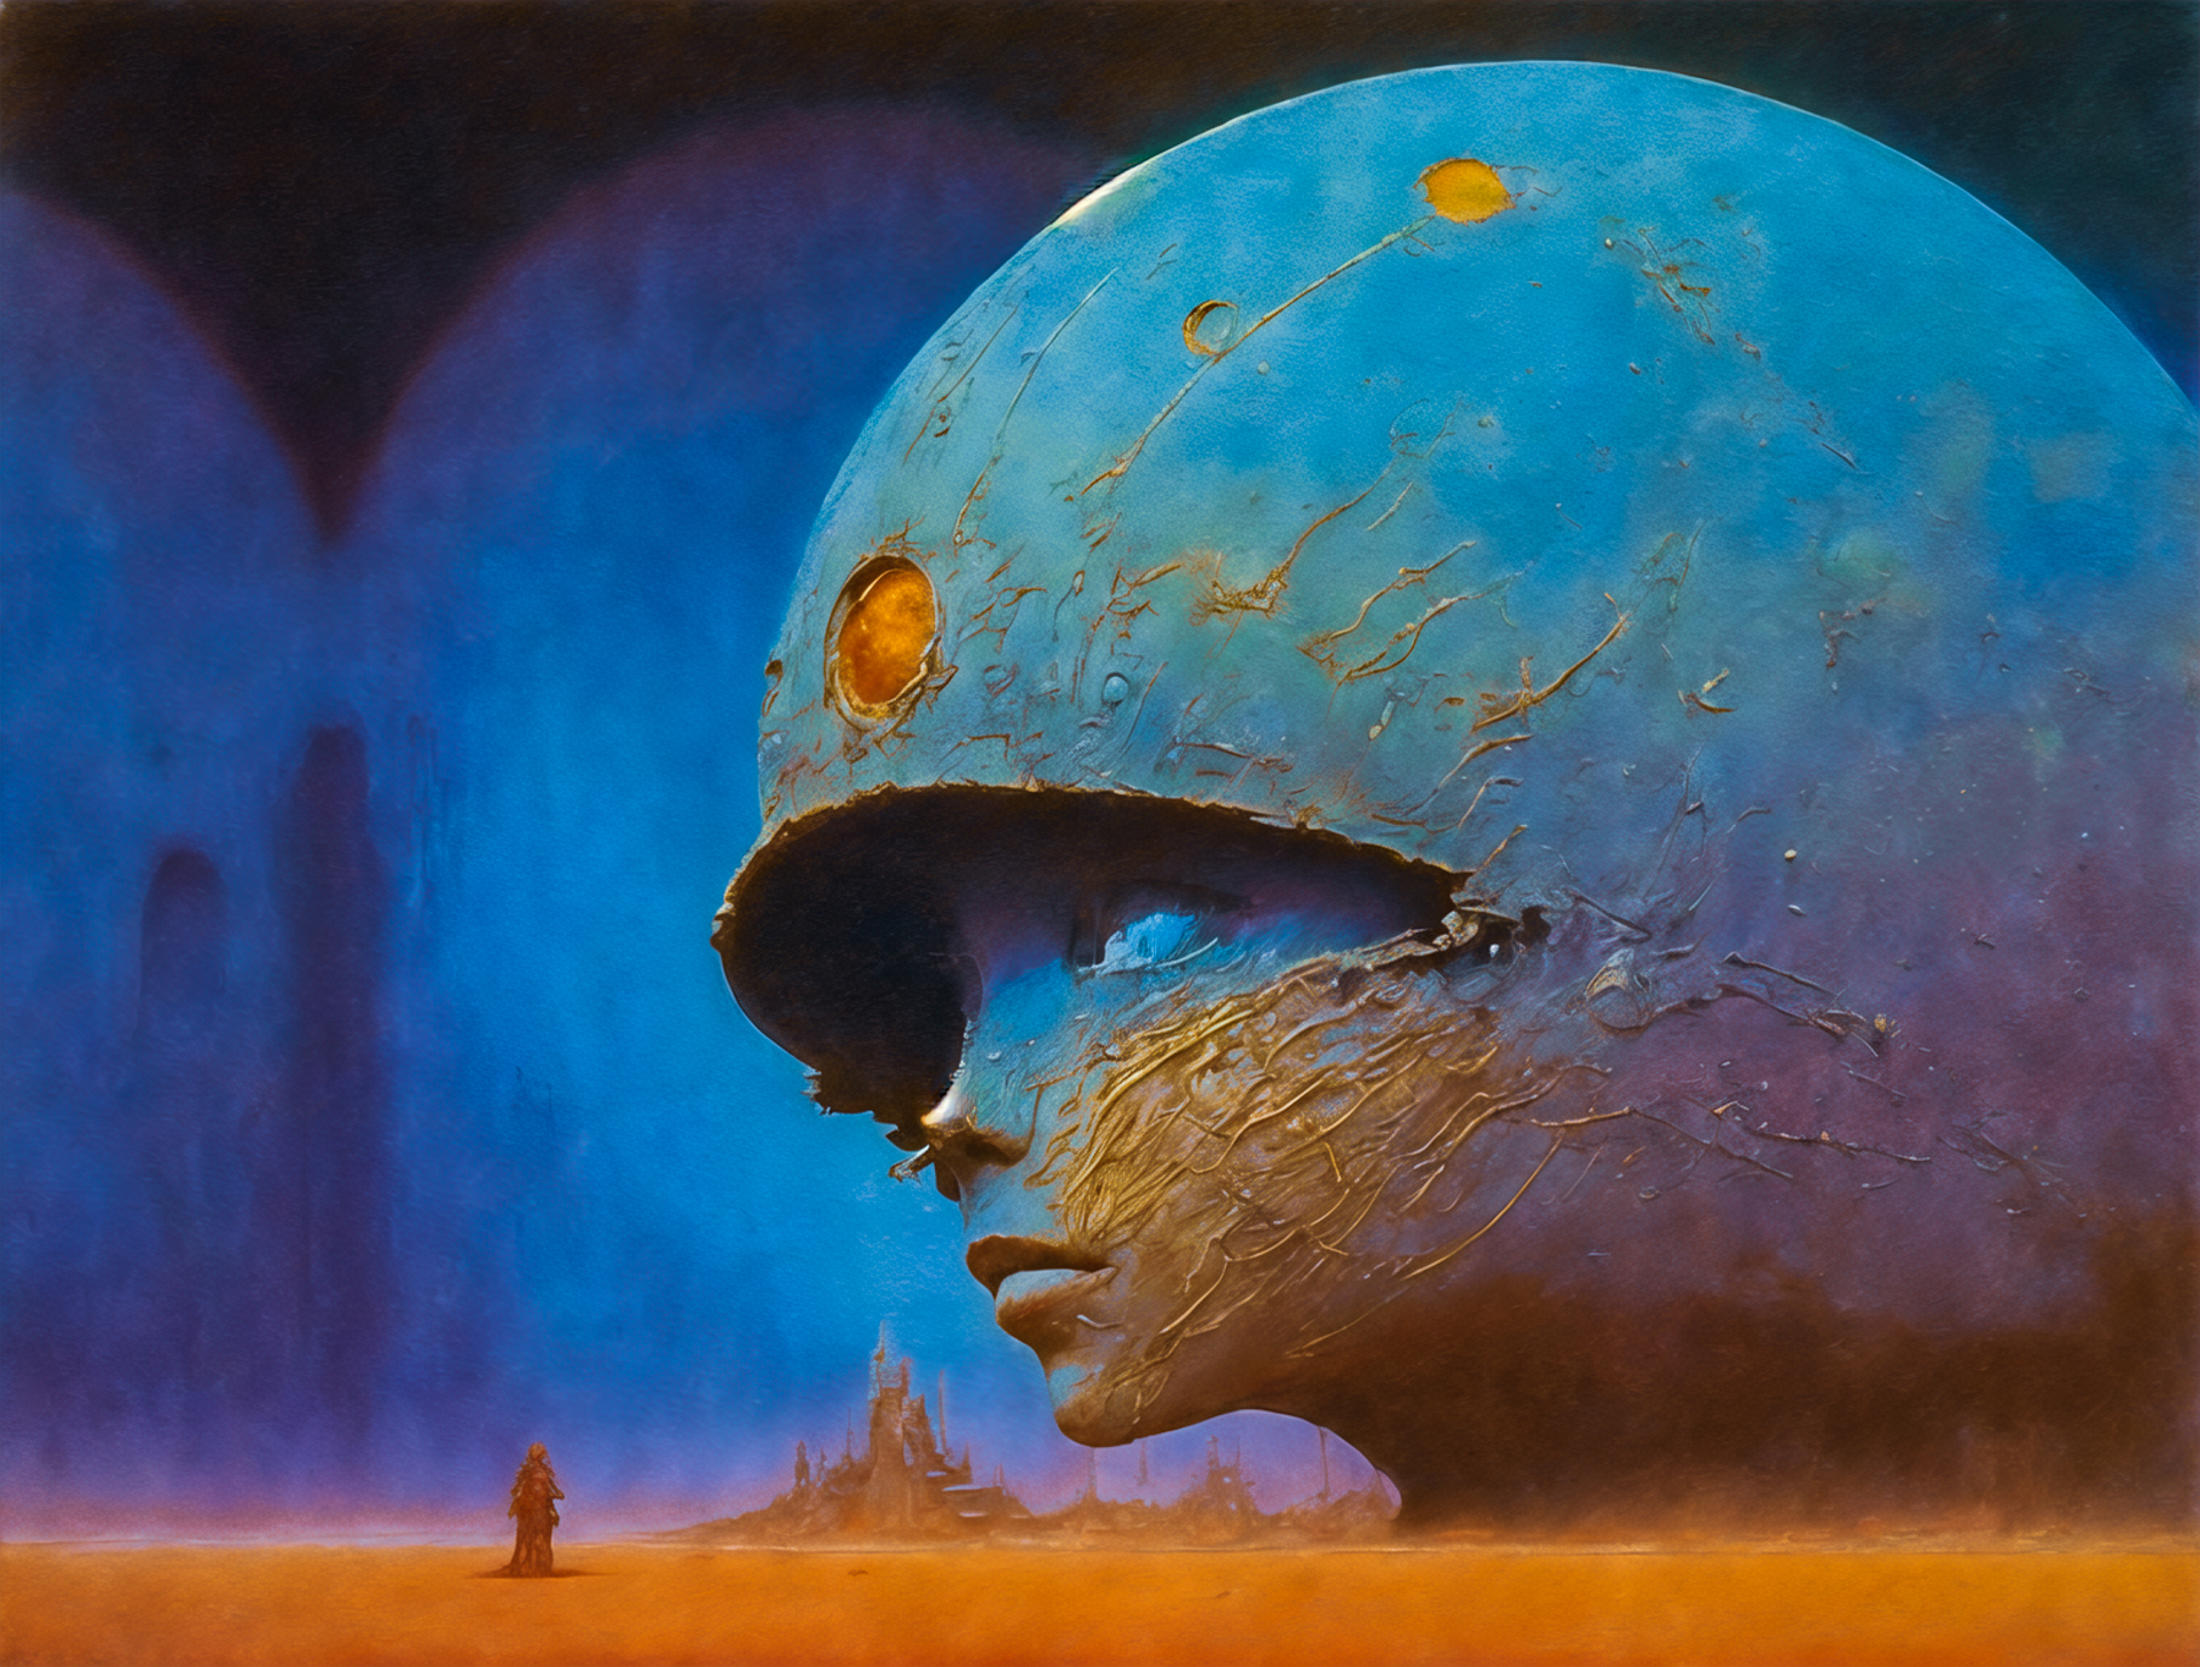 A person standing in front of a large sculpture, including a blue head and a spacecraft.